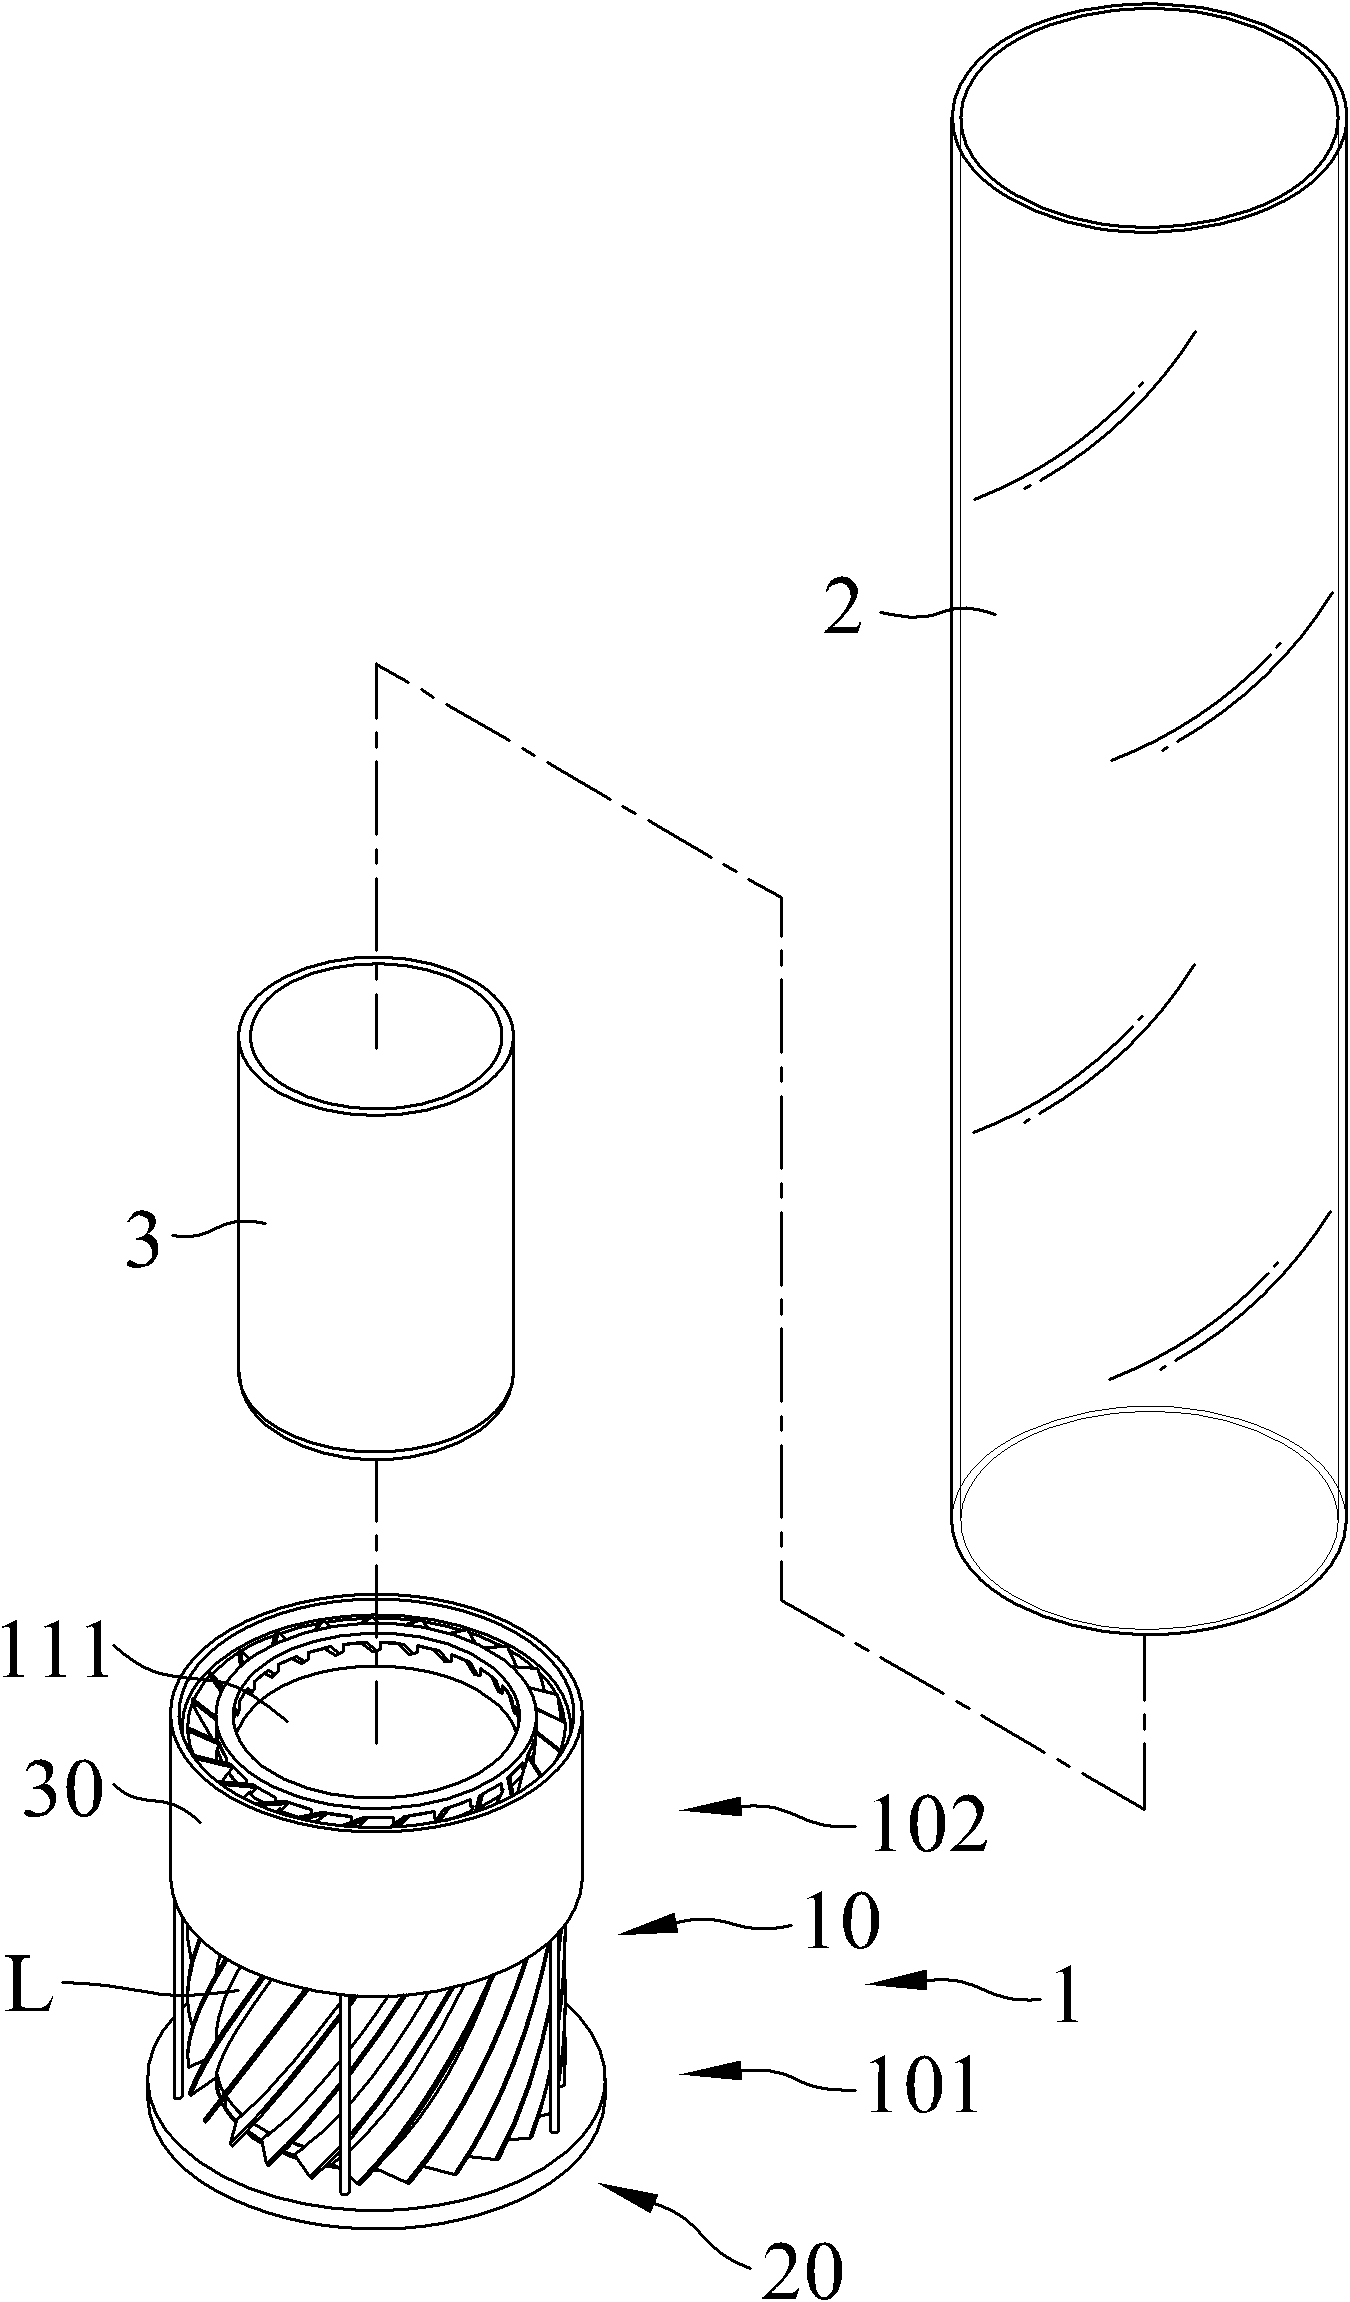 Device capable of increasing flame height